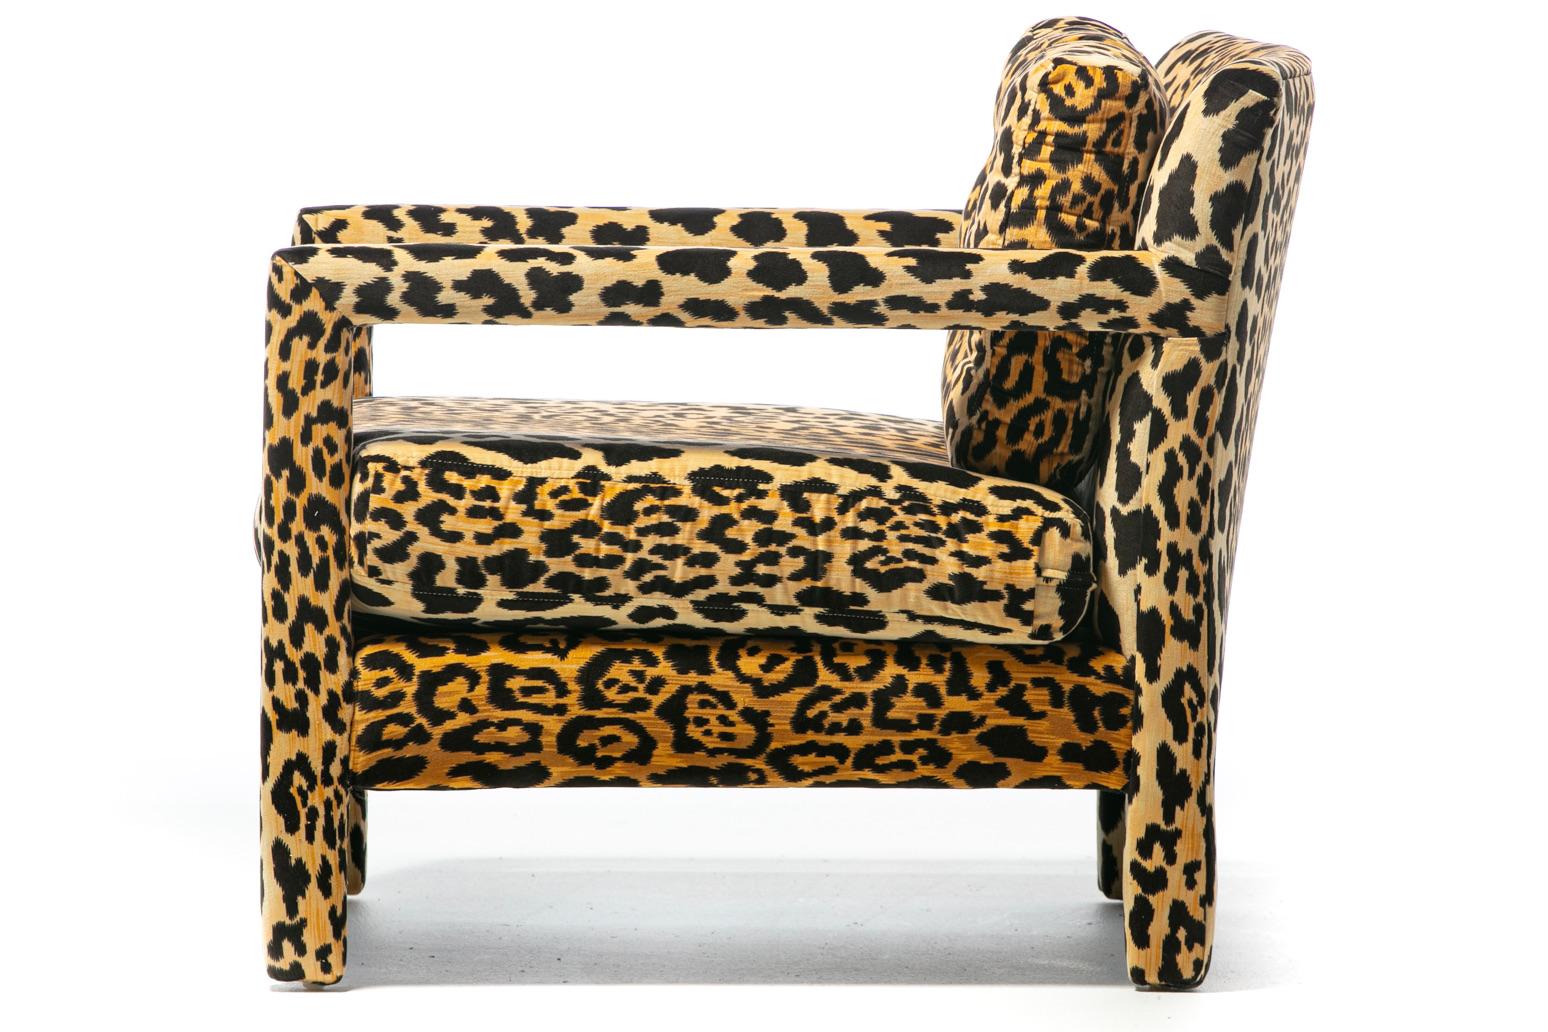 Pair of Milo Baughman Style Mid Century Parsons Chairs in Leopard Velvet c. 1970 For Sale 7